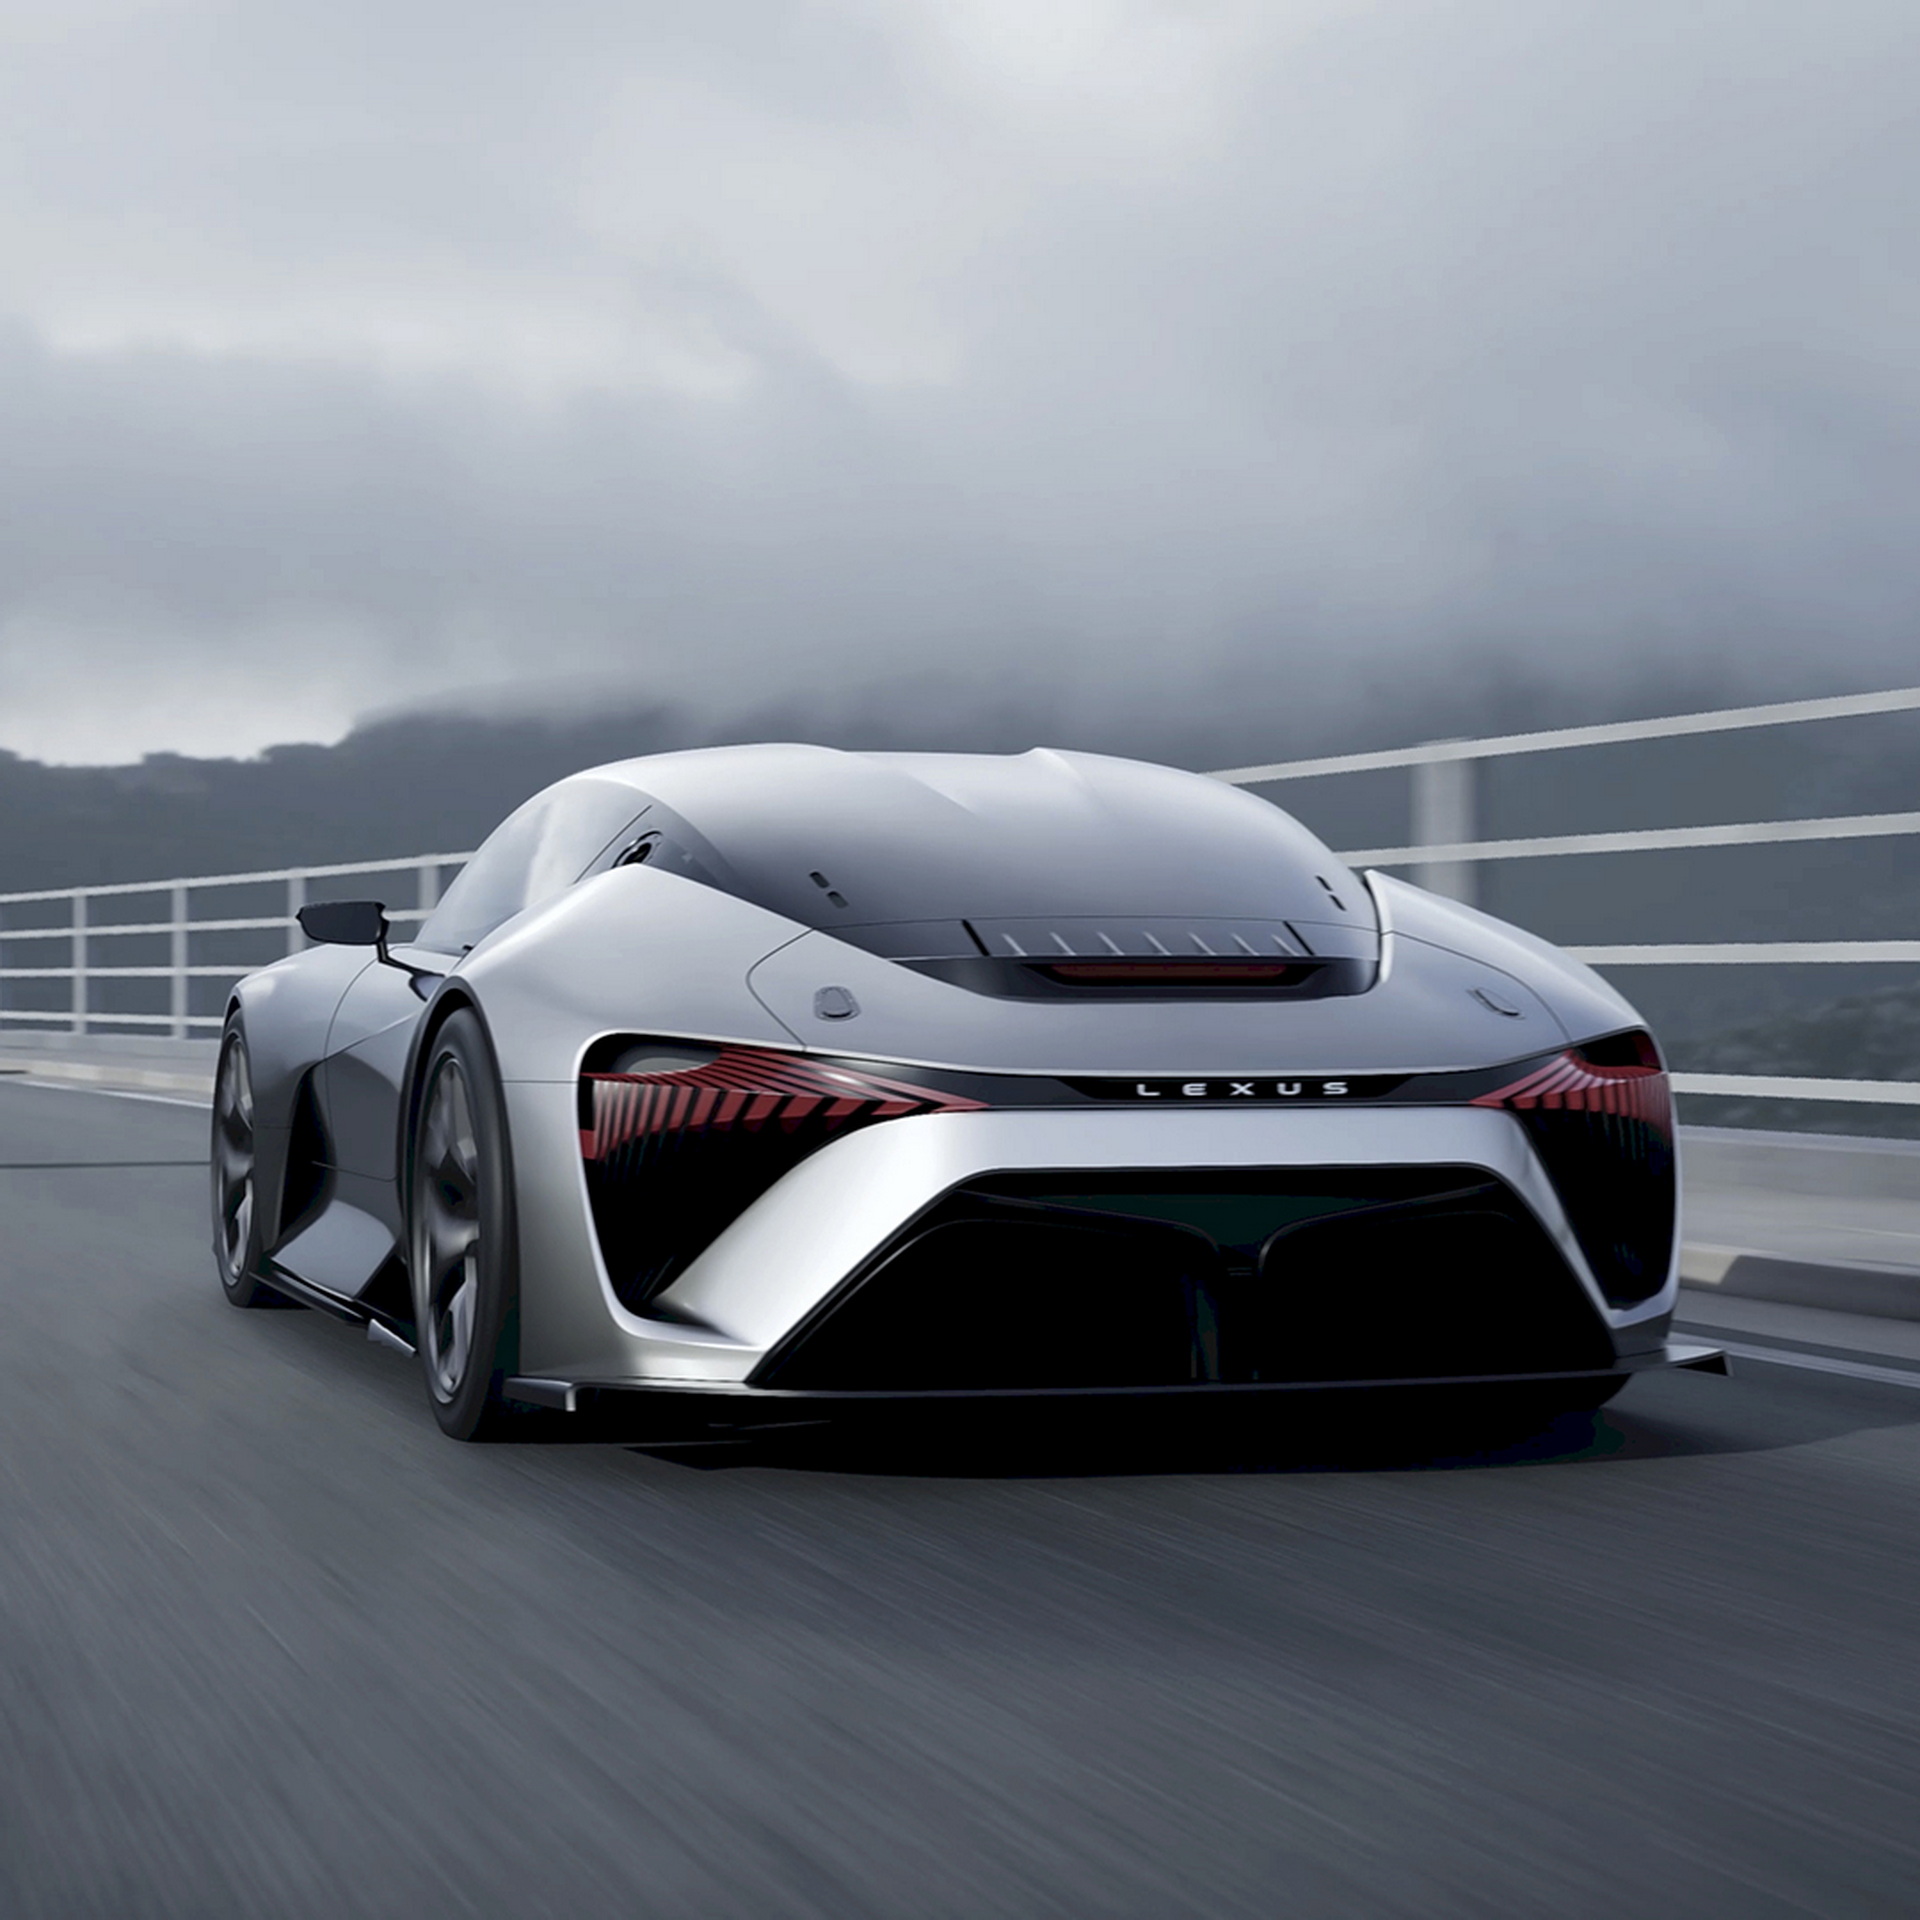 The Lexus electrified sports concept will make its Euro debut at the Goodwood Speed ​​Festival